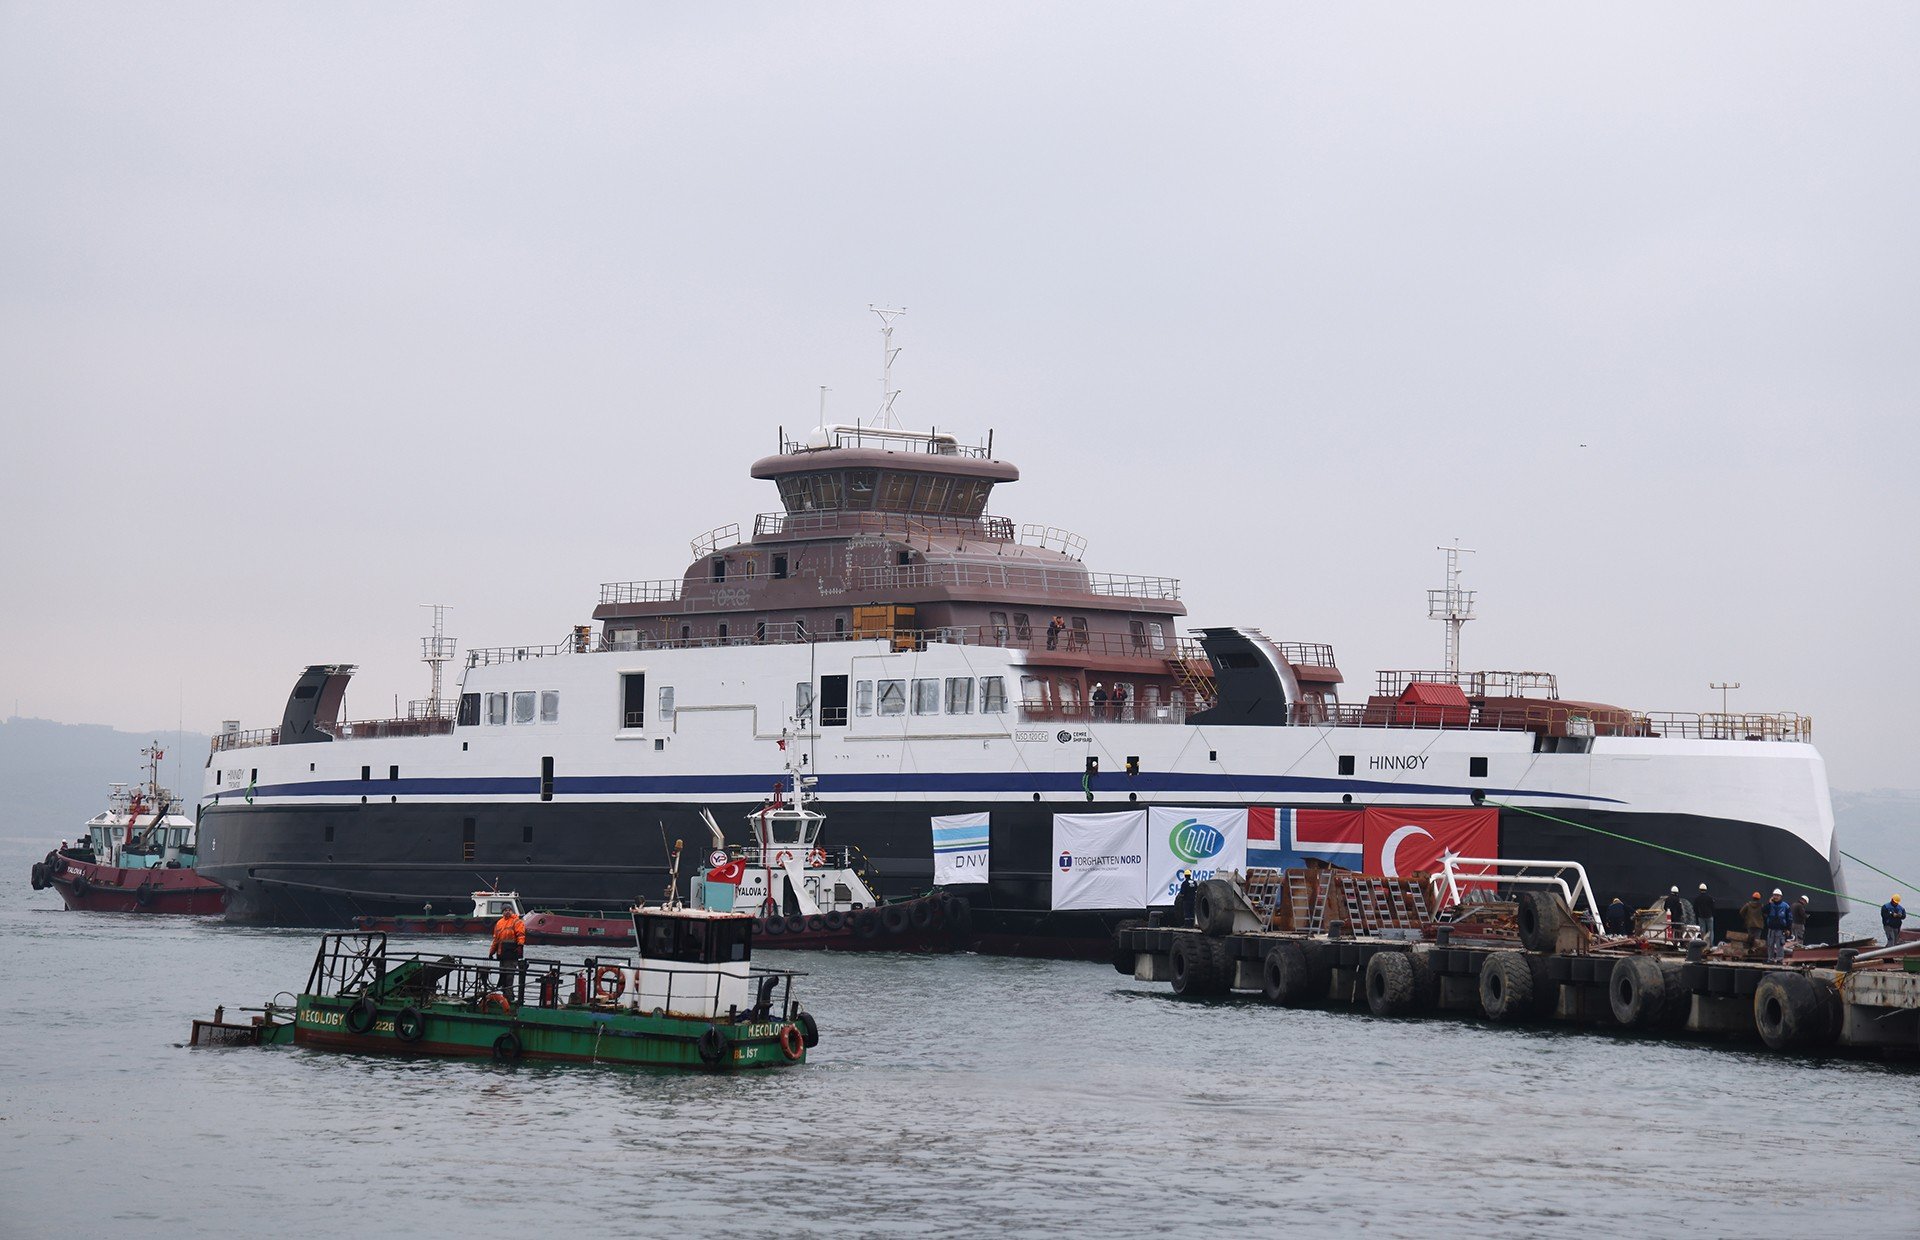 Norway's Largest Zero-Emission Ferry NB1091 Hinnøy is Launched!